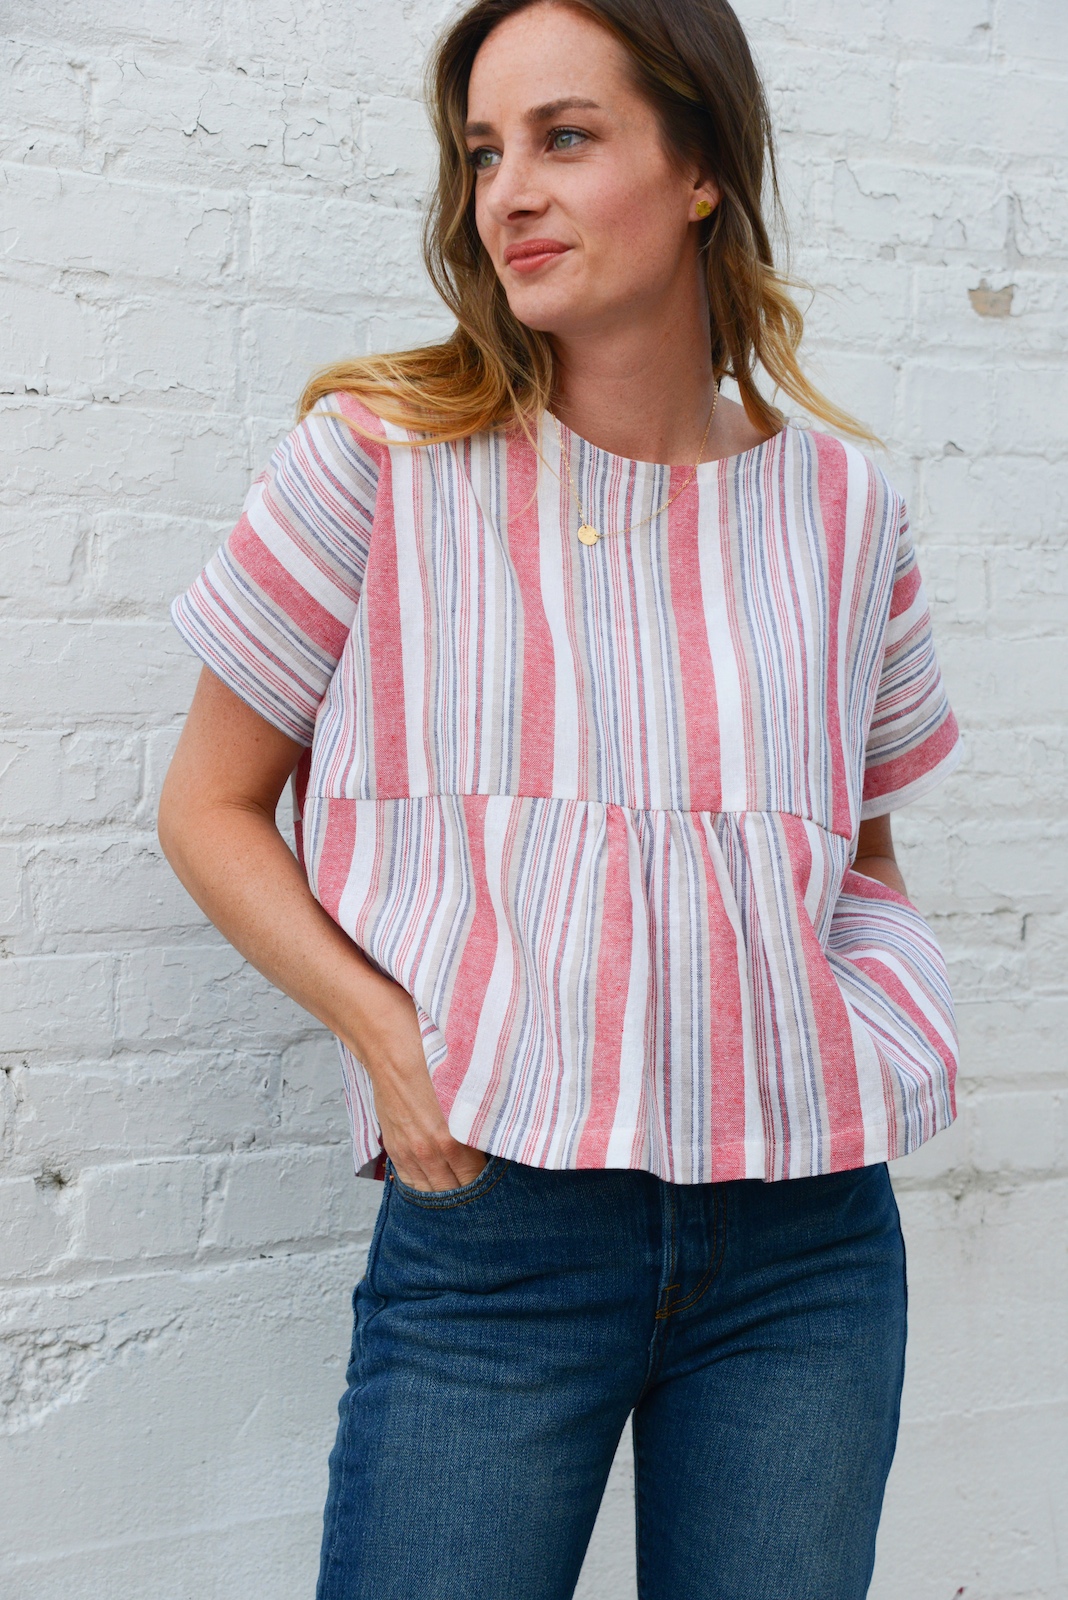 How To Sew a Womens Boxy Gathered Top - WeAllSew